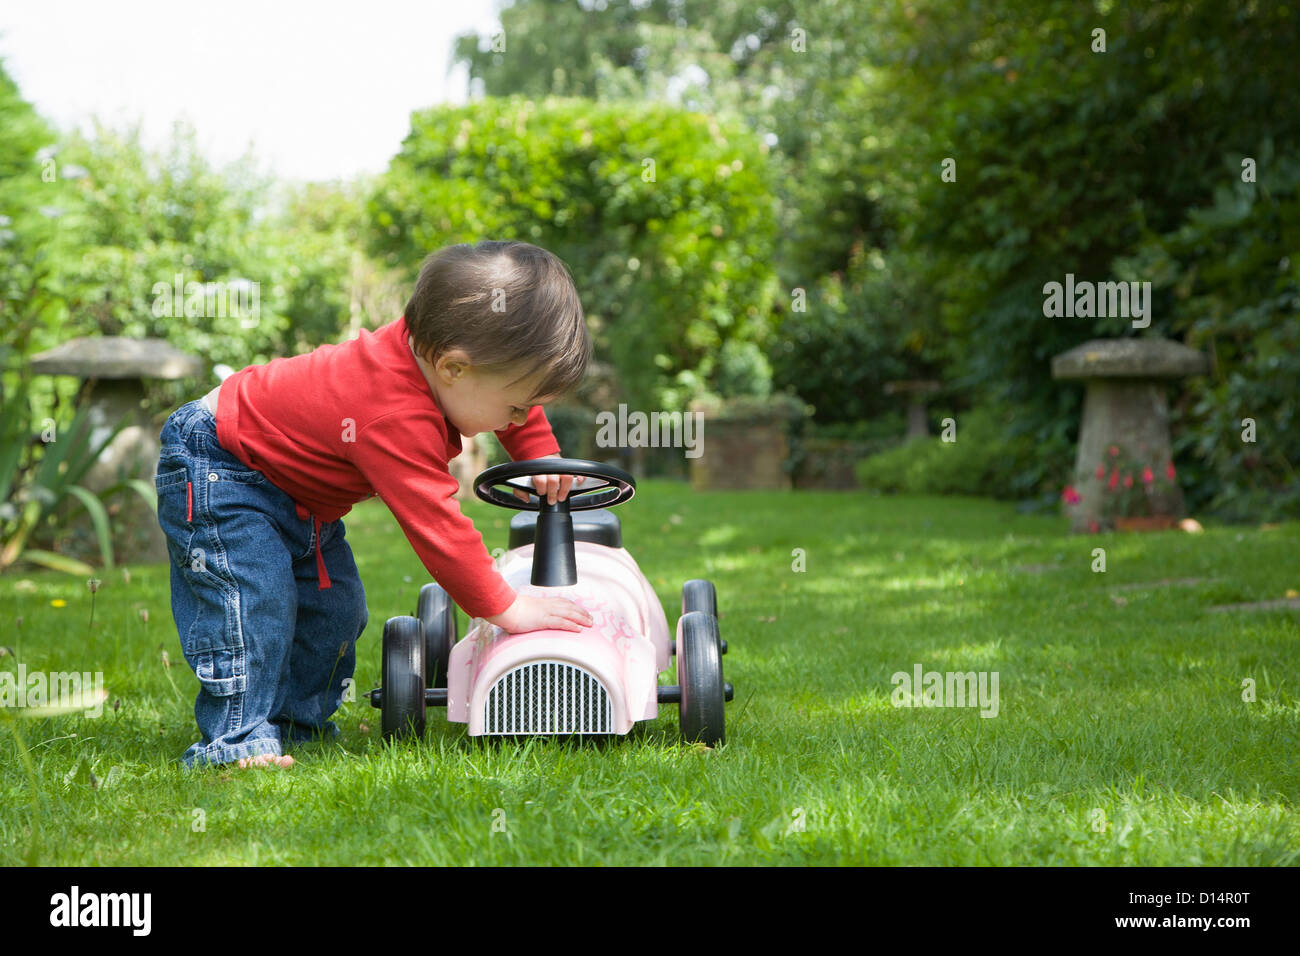 Toddler girl playing with go kart Stock Photo